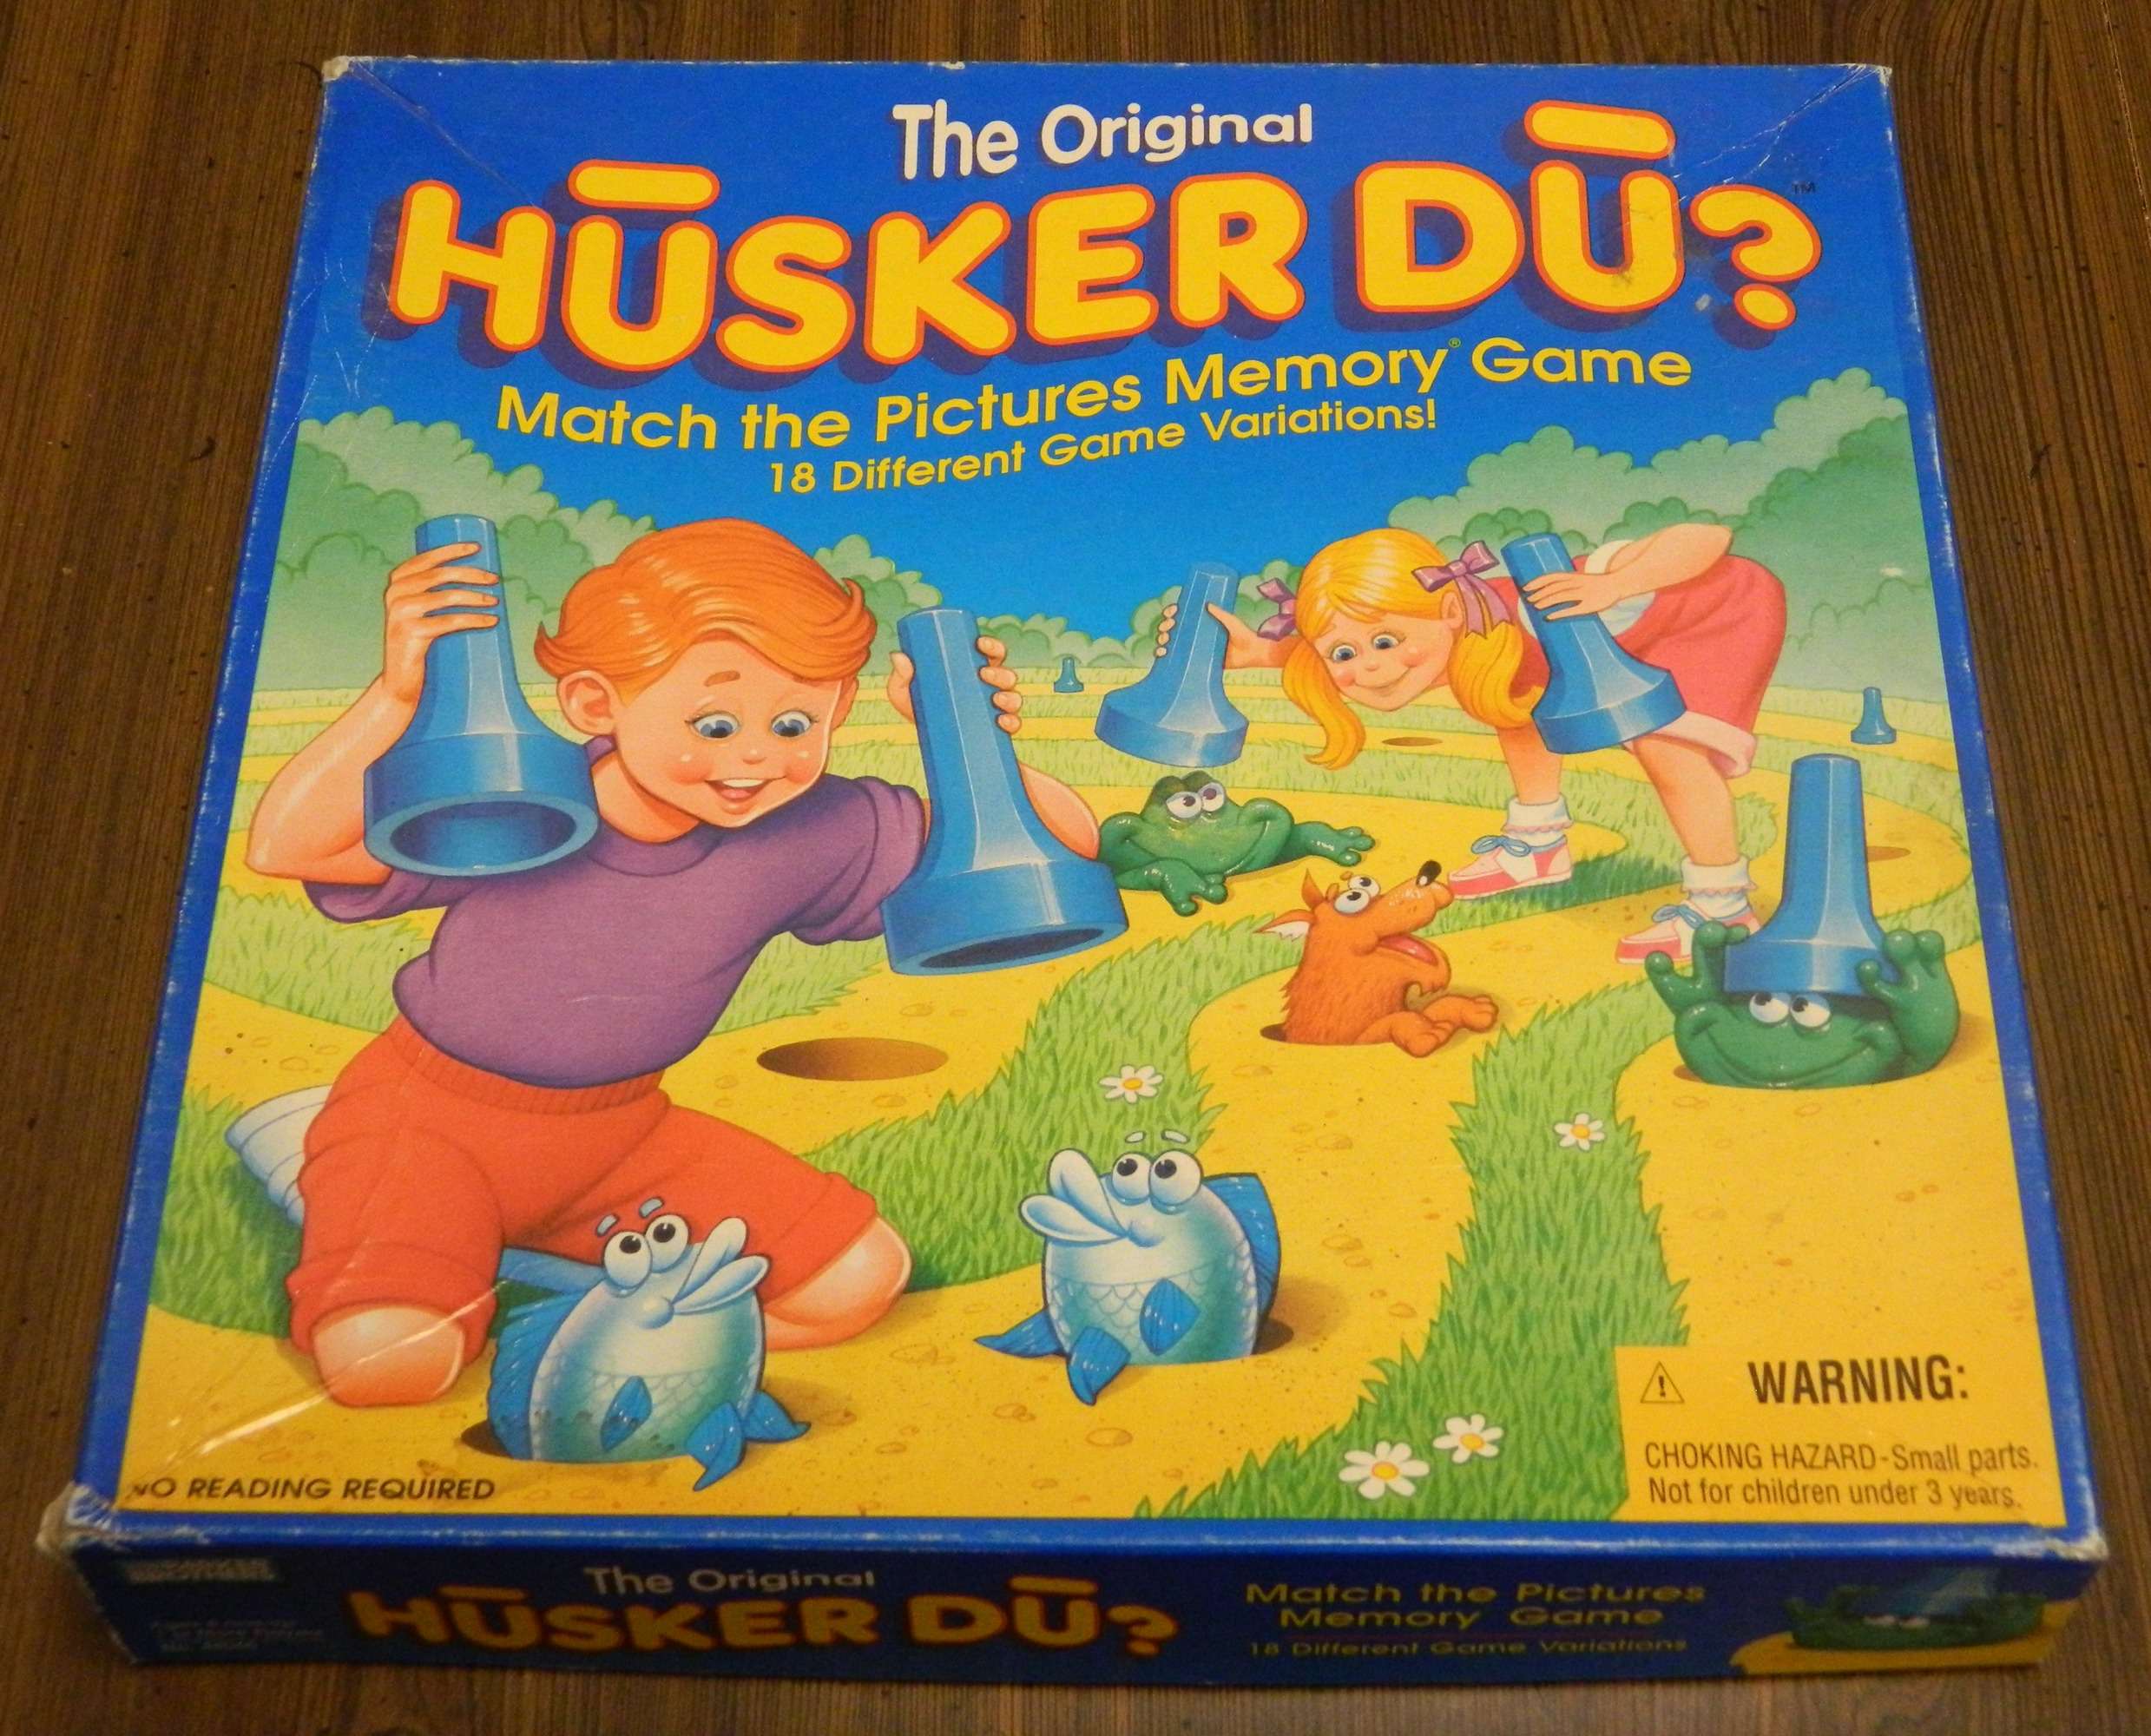 Match the Pictures Memory Game The Original Husker Du